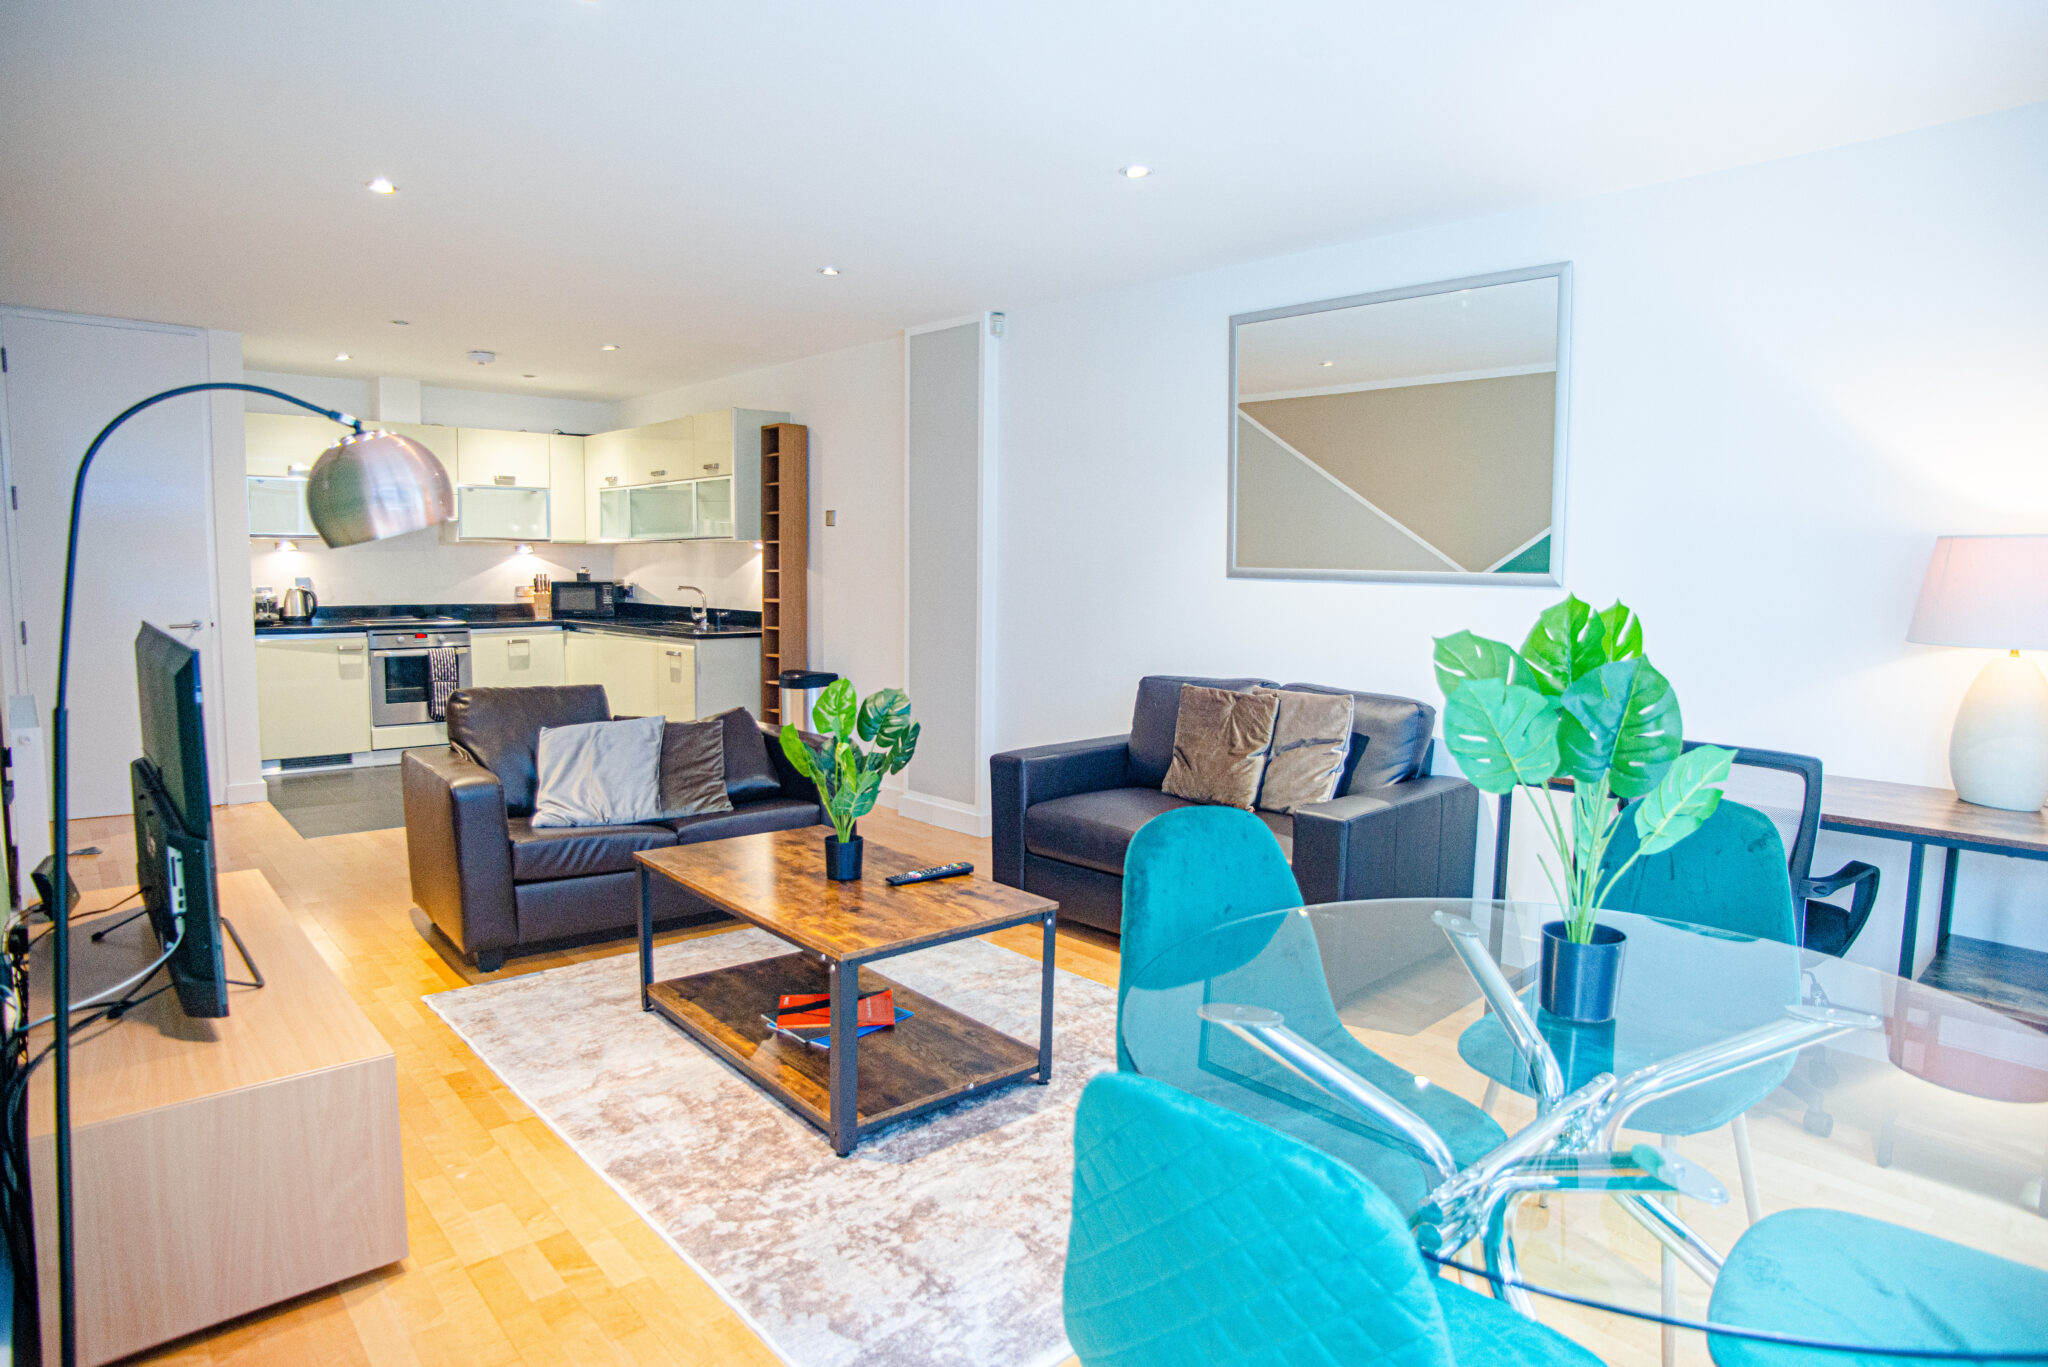 Experience-luxurious-serviced-apartments-at-Farringdon.-Explore-our-prime-London-location,-modern-amenities,-and-stylish-interiors.-Book-now!